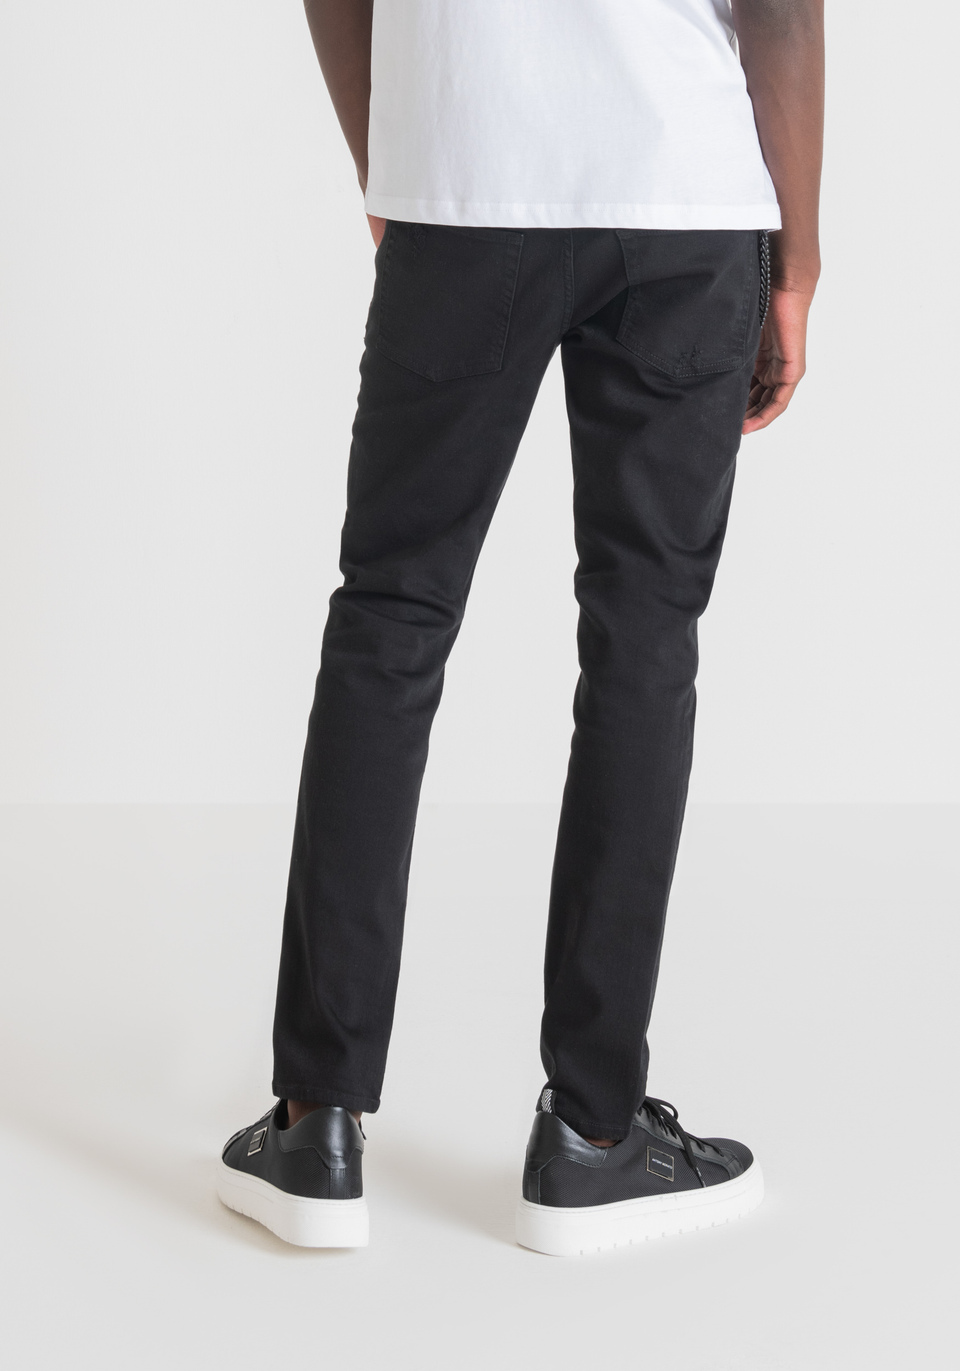 JEANS TAPERED FIT “IGGY” IN DENIM STRETCH - Antony Morato Online Shop